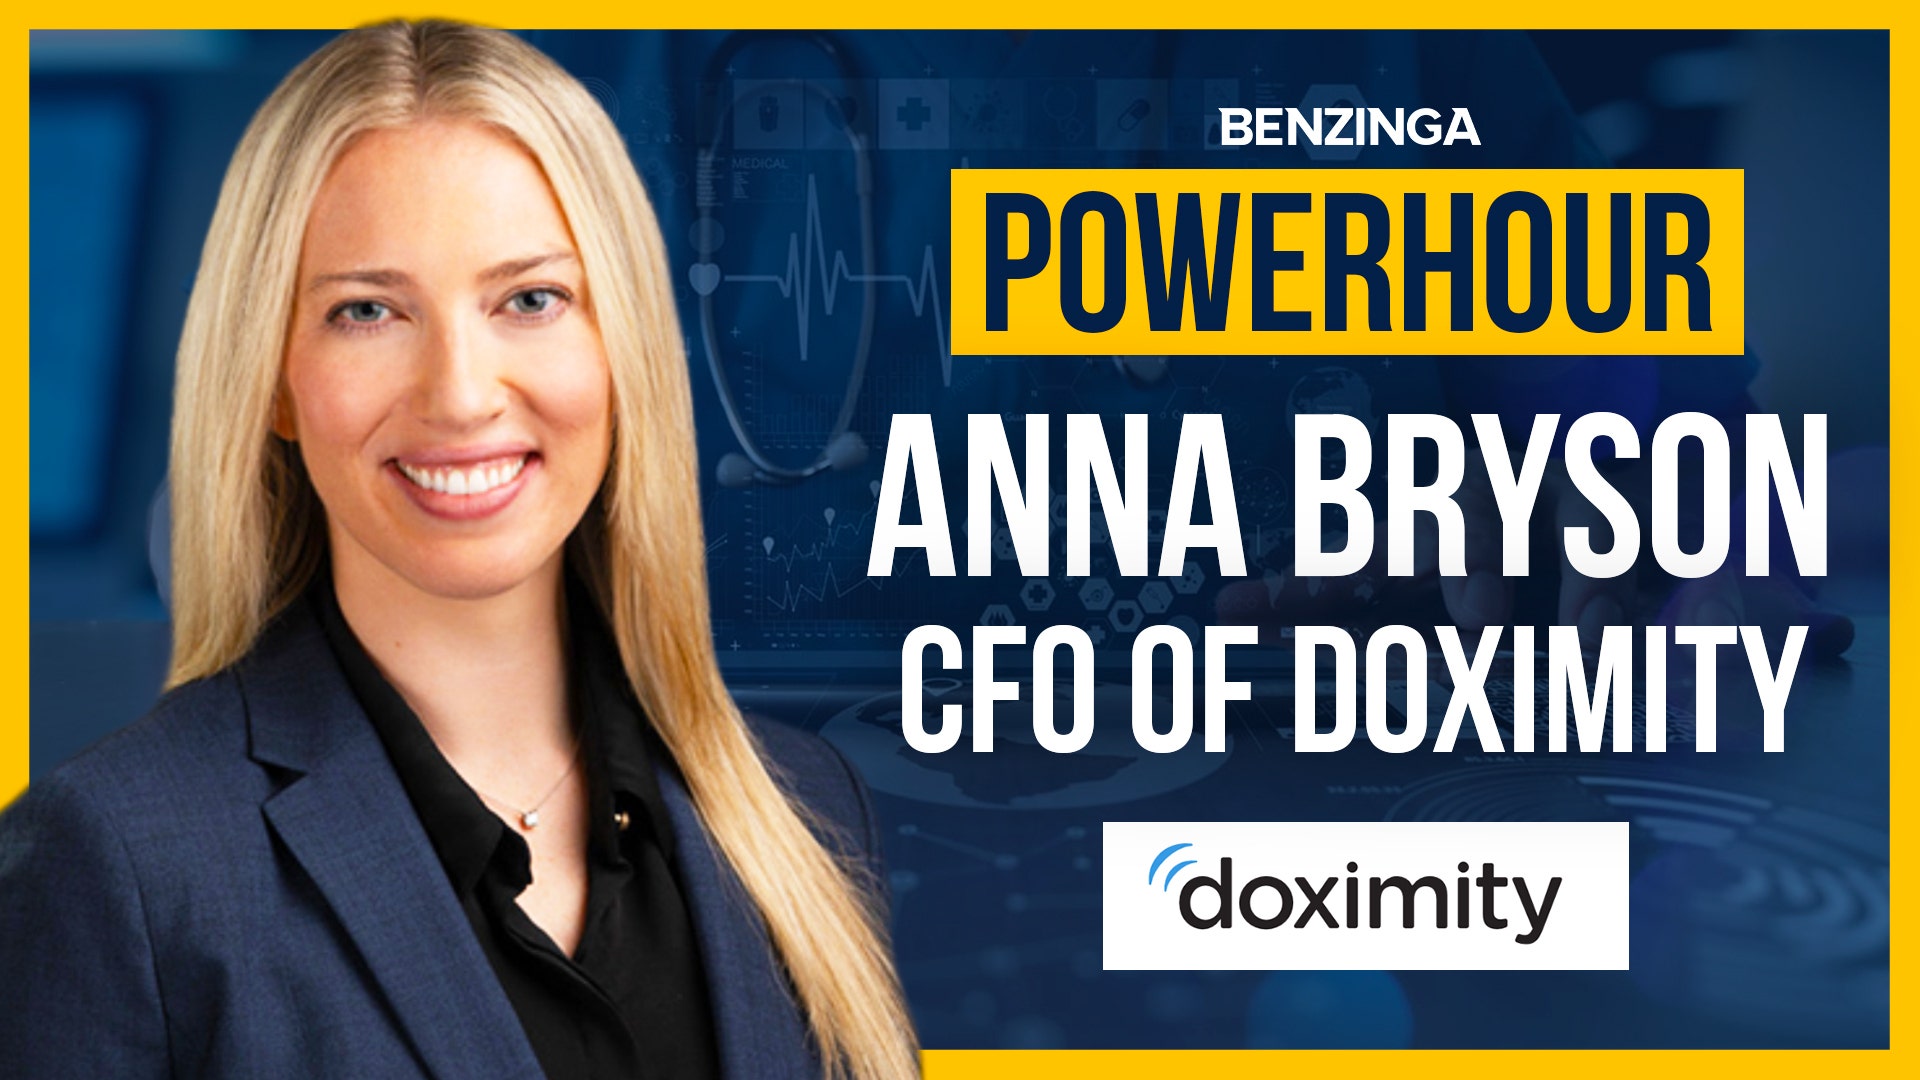 EXCLUSIVE: Doximity CFO Anna Bryson Talks Digital Health Care Platform, Physician-First Mission On 'Power Hour'